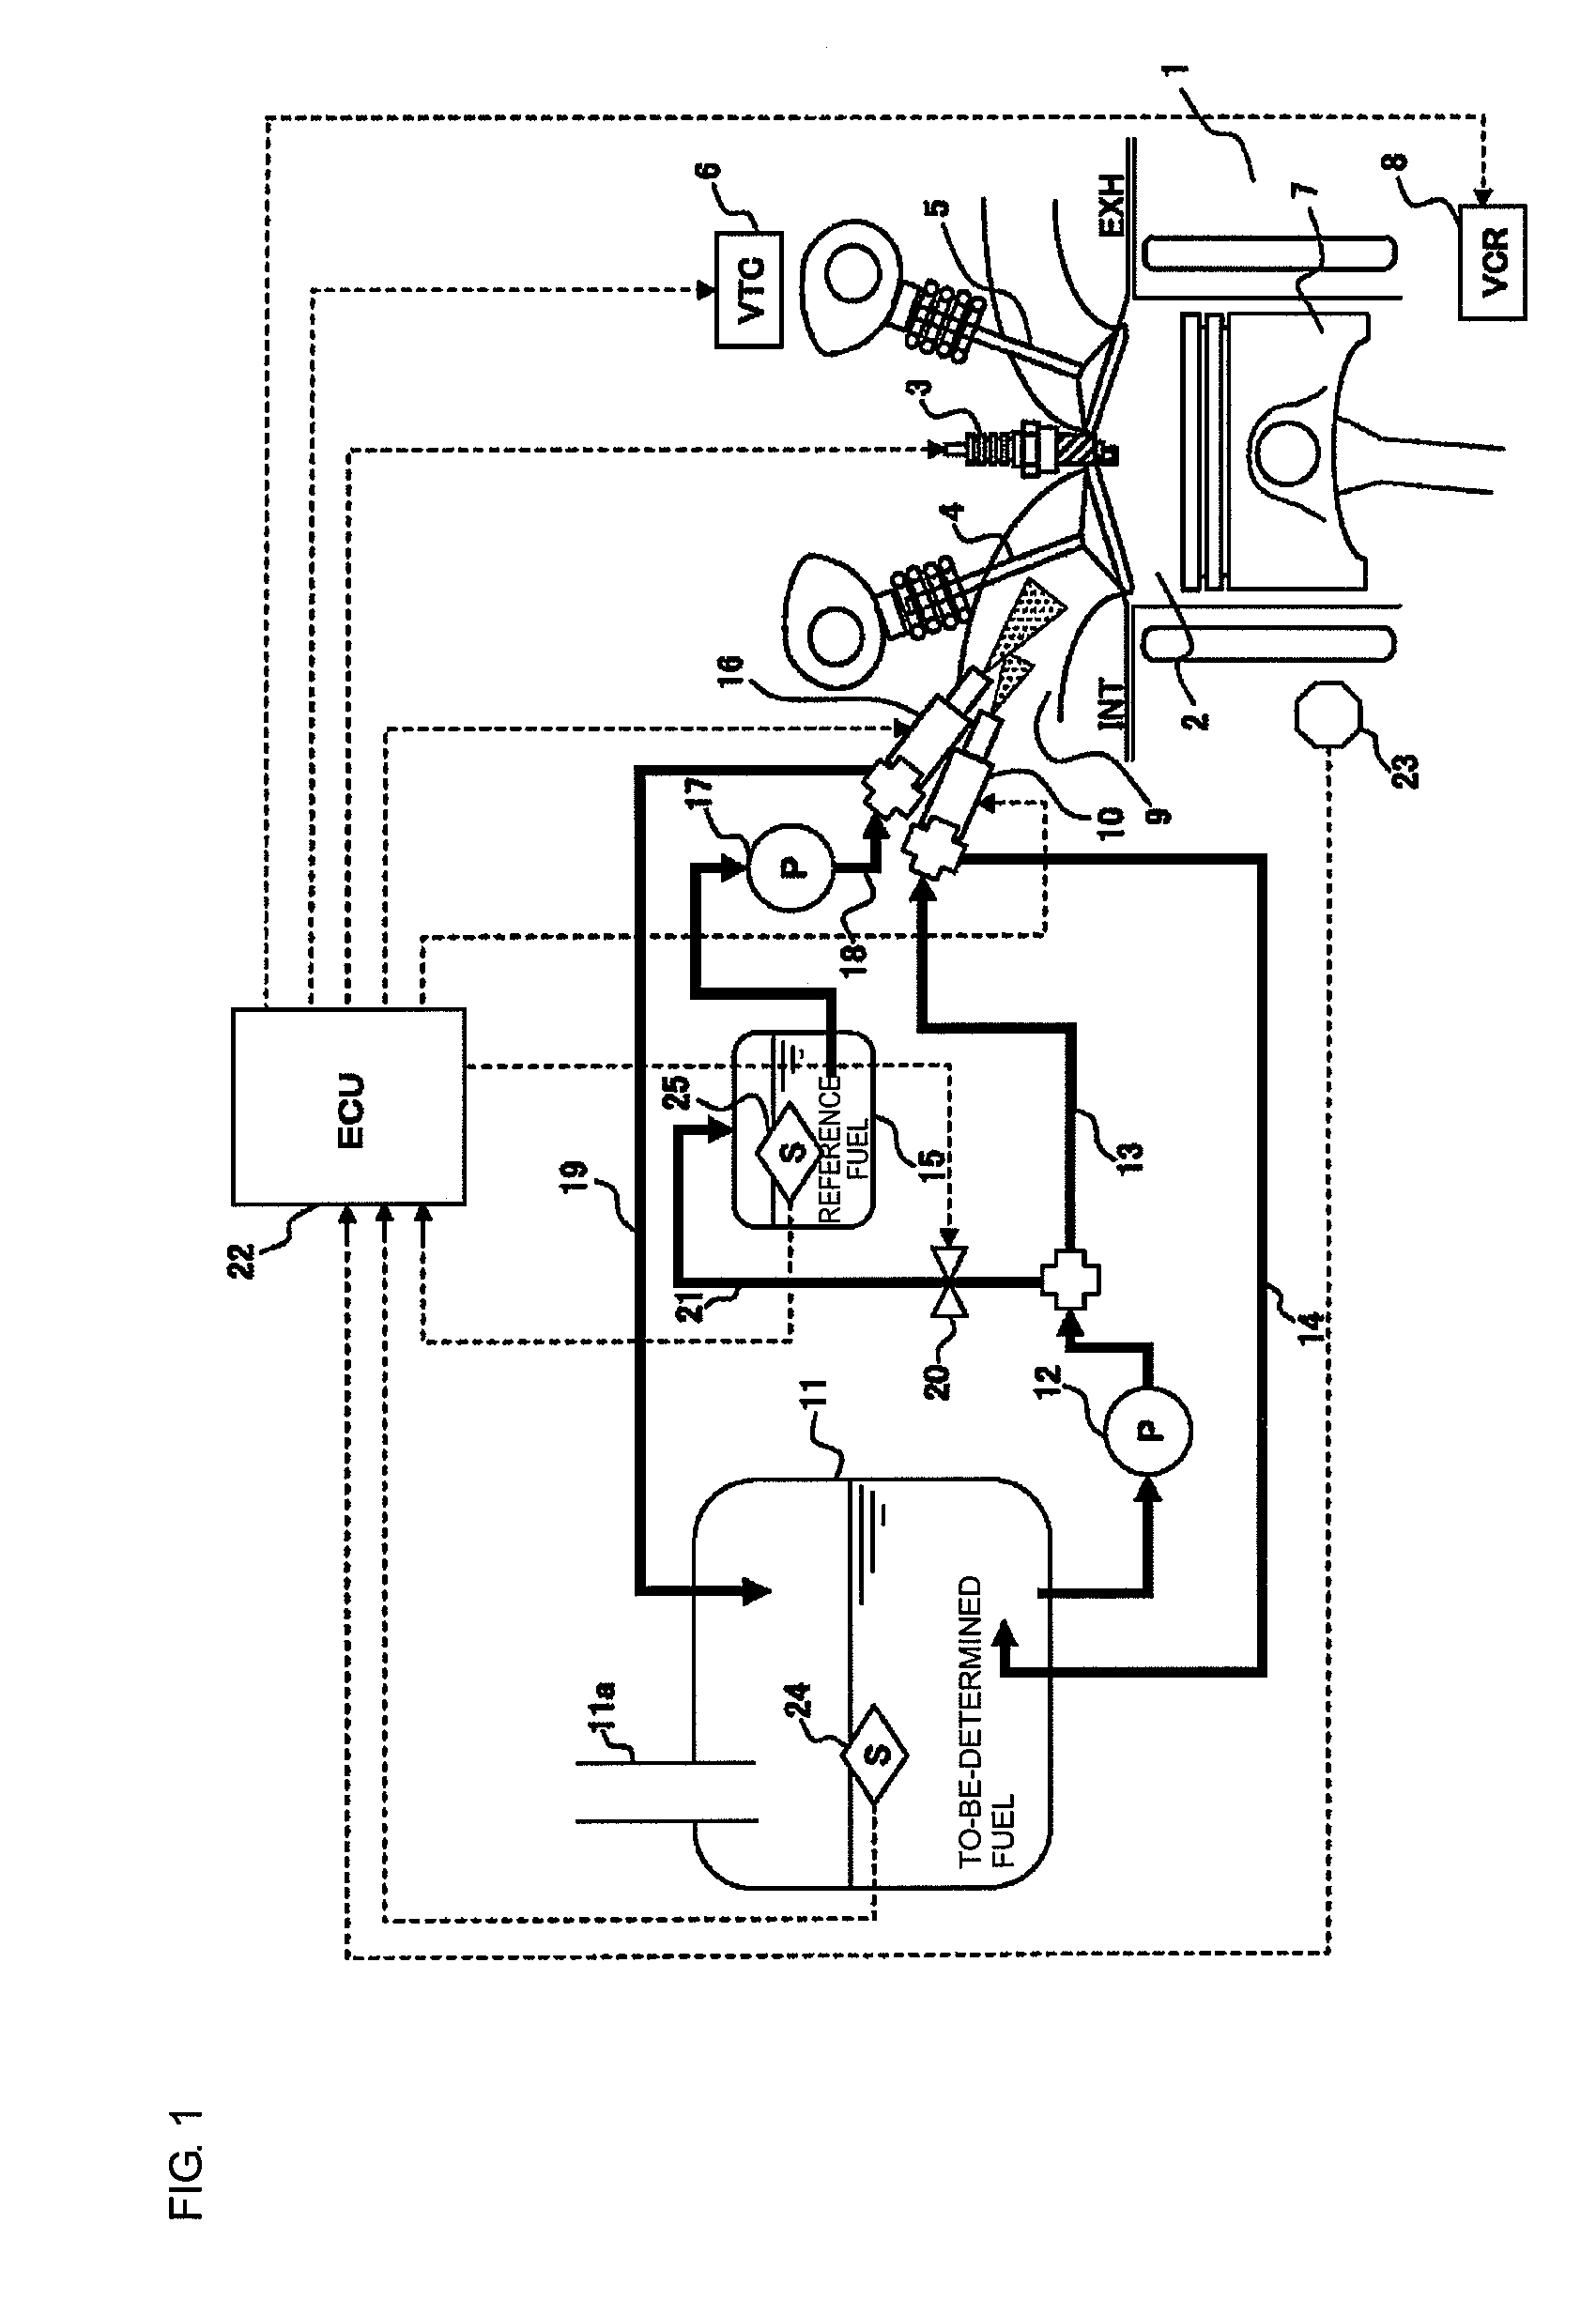 Spark ignition type internal combustion engine